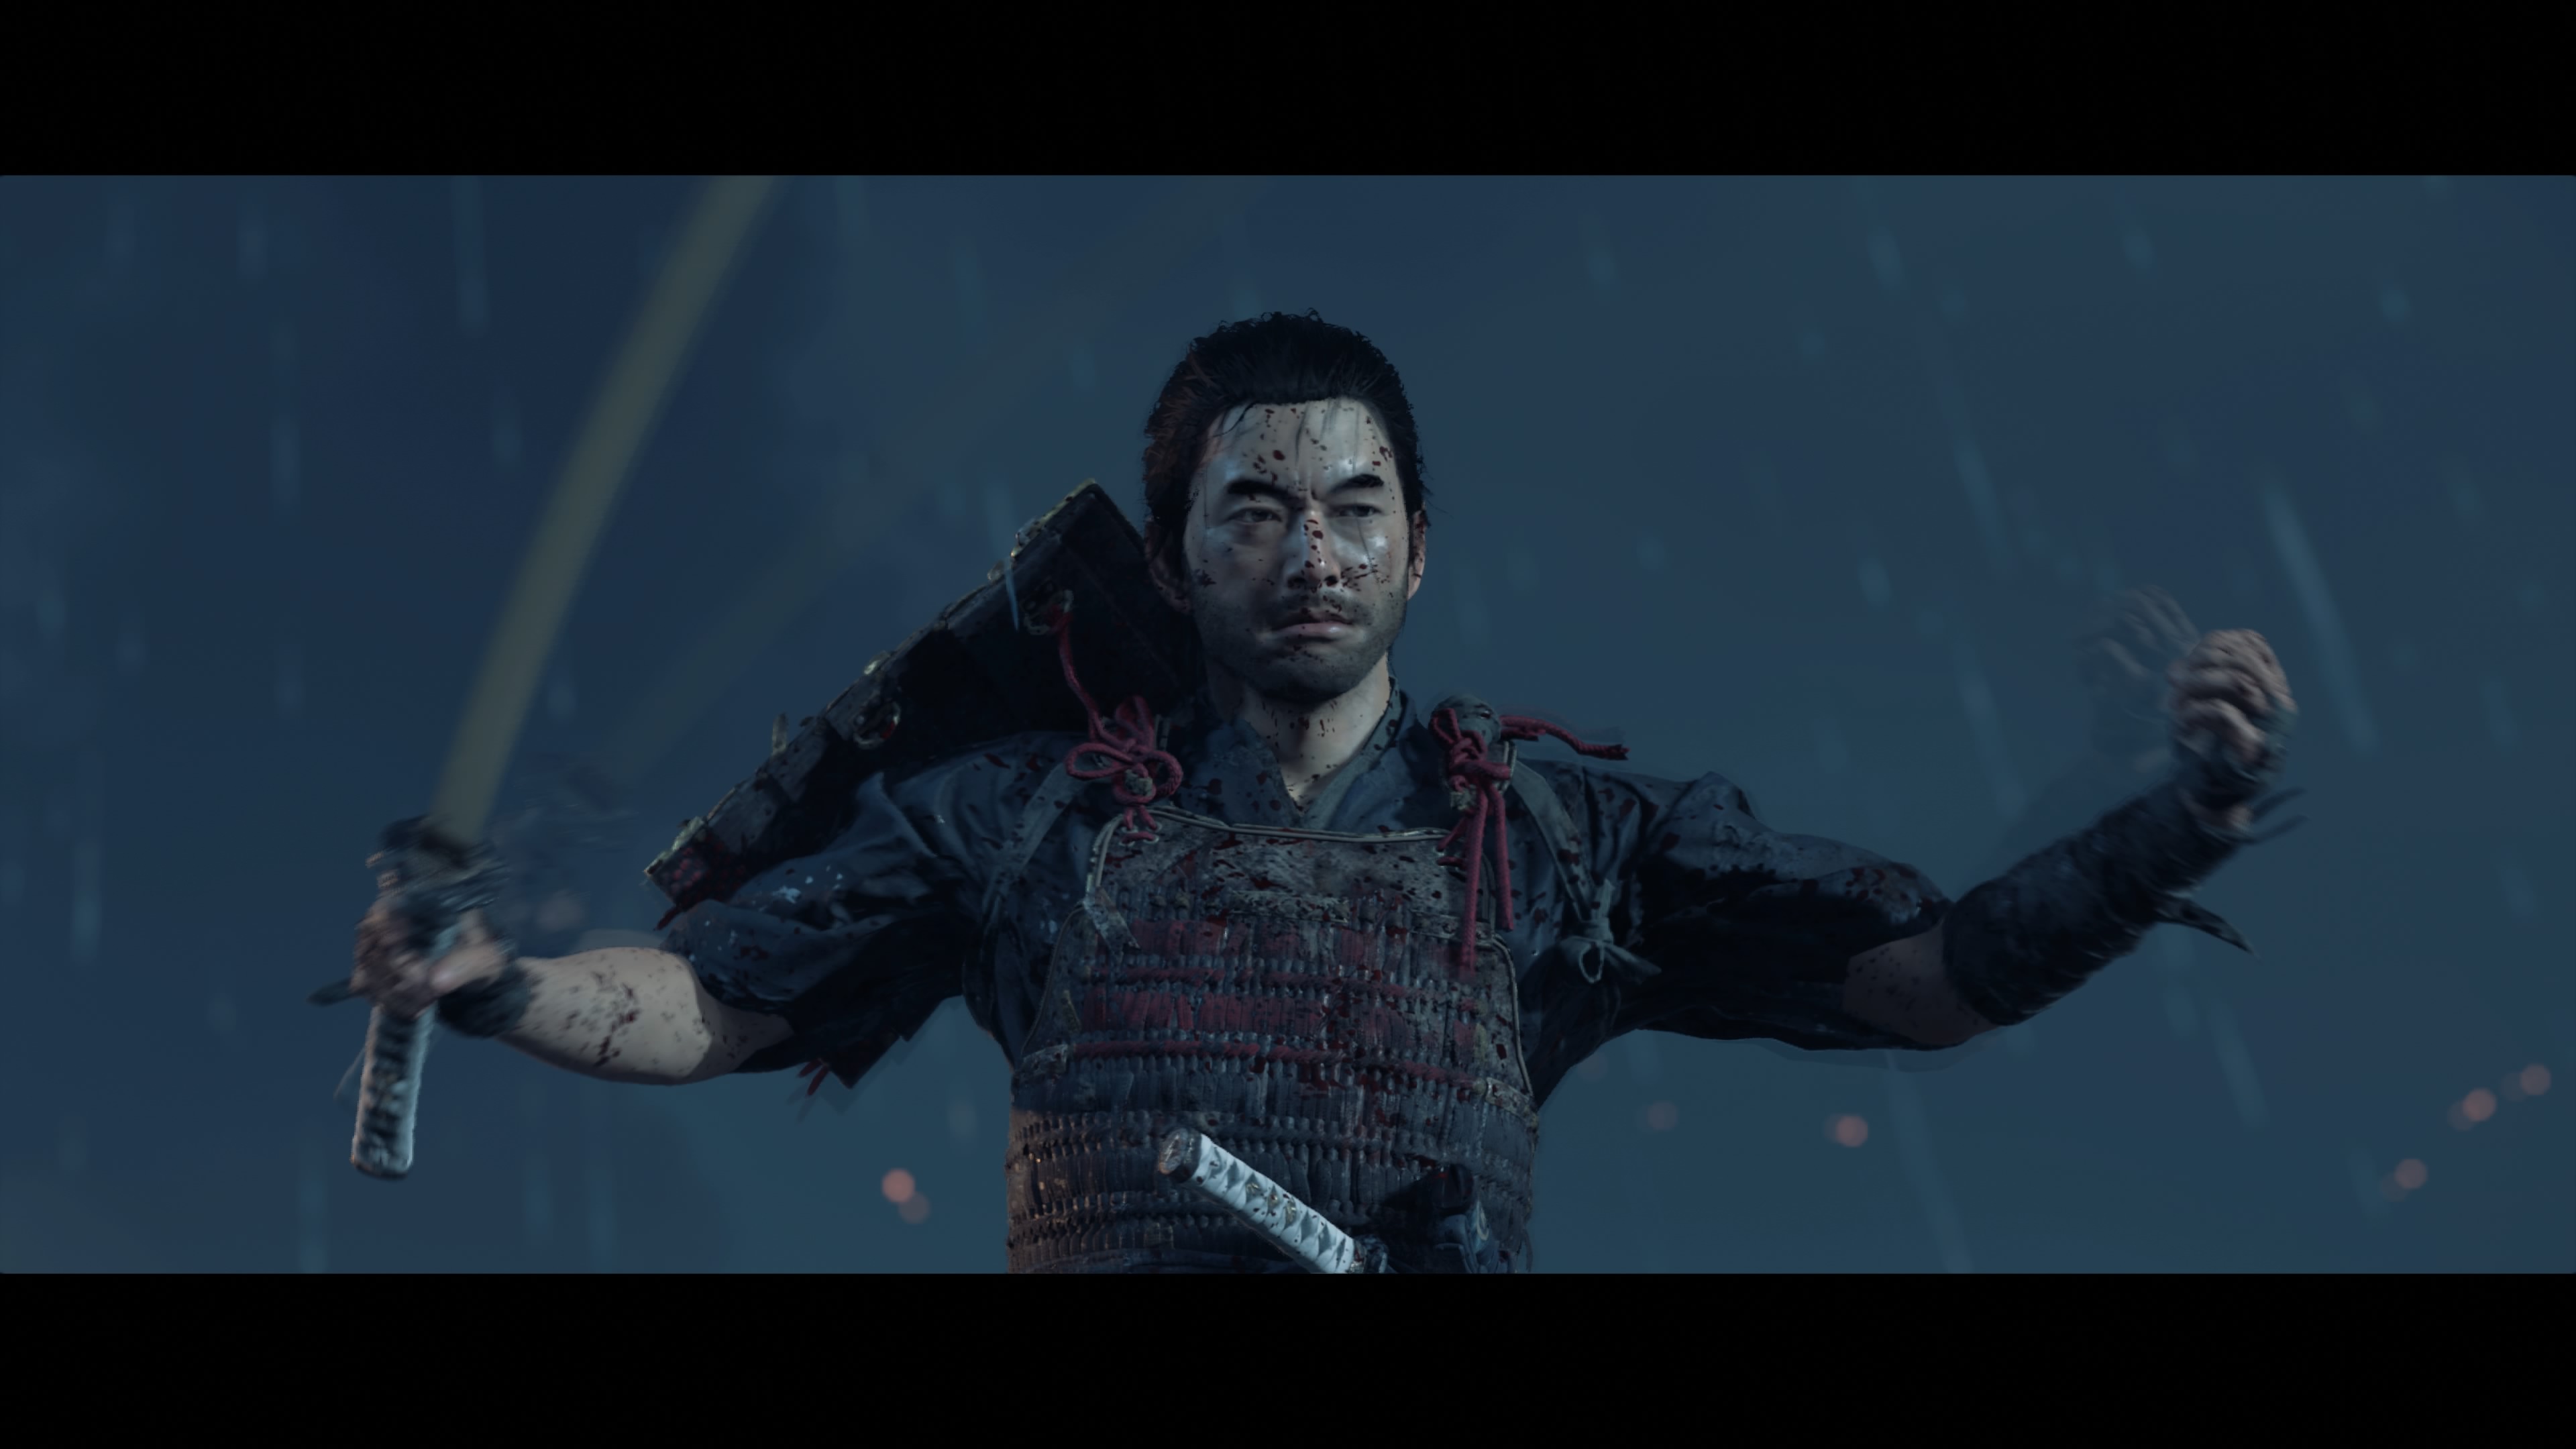 Ghost of Tsushima’s main character Jin Sakai poses with armor and a sword